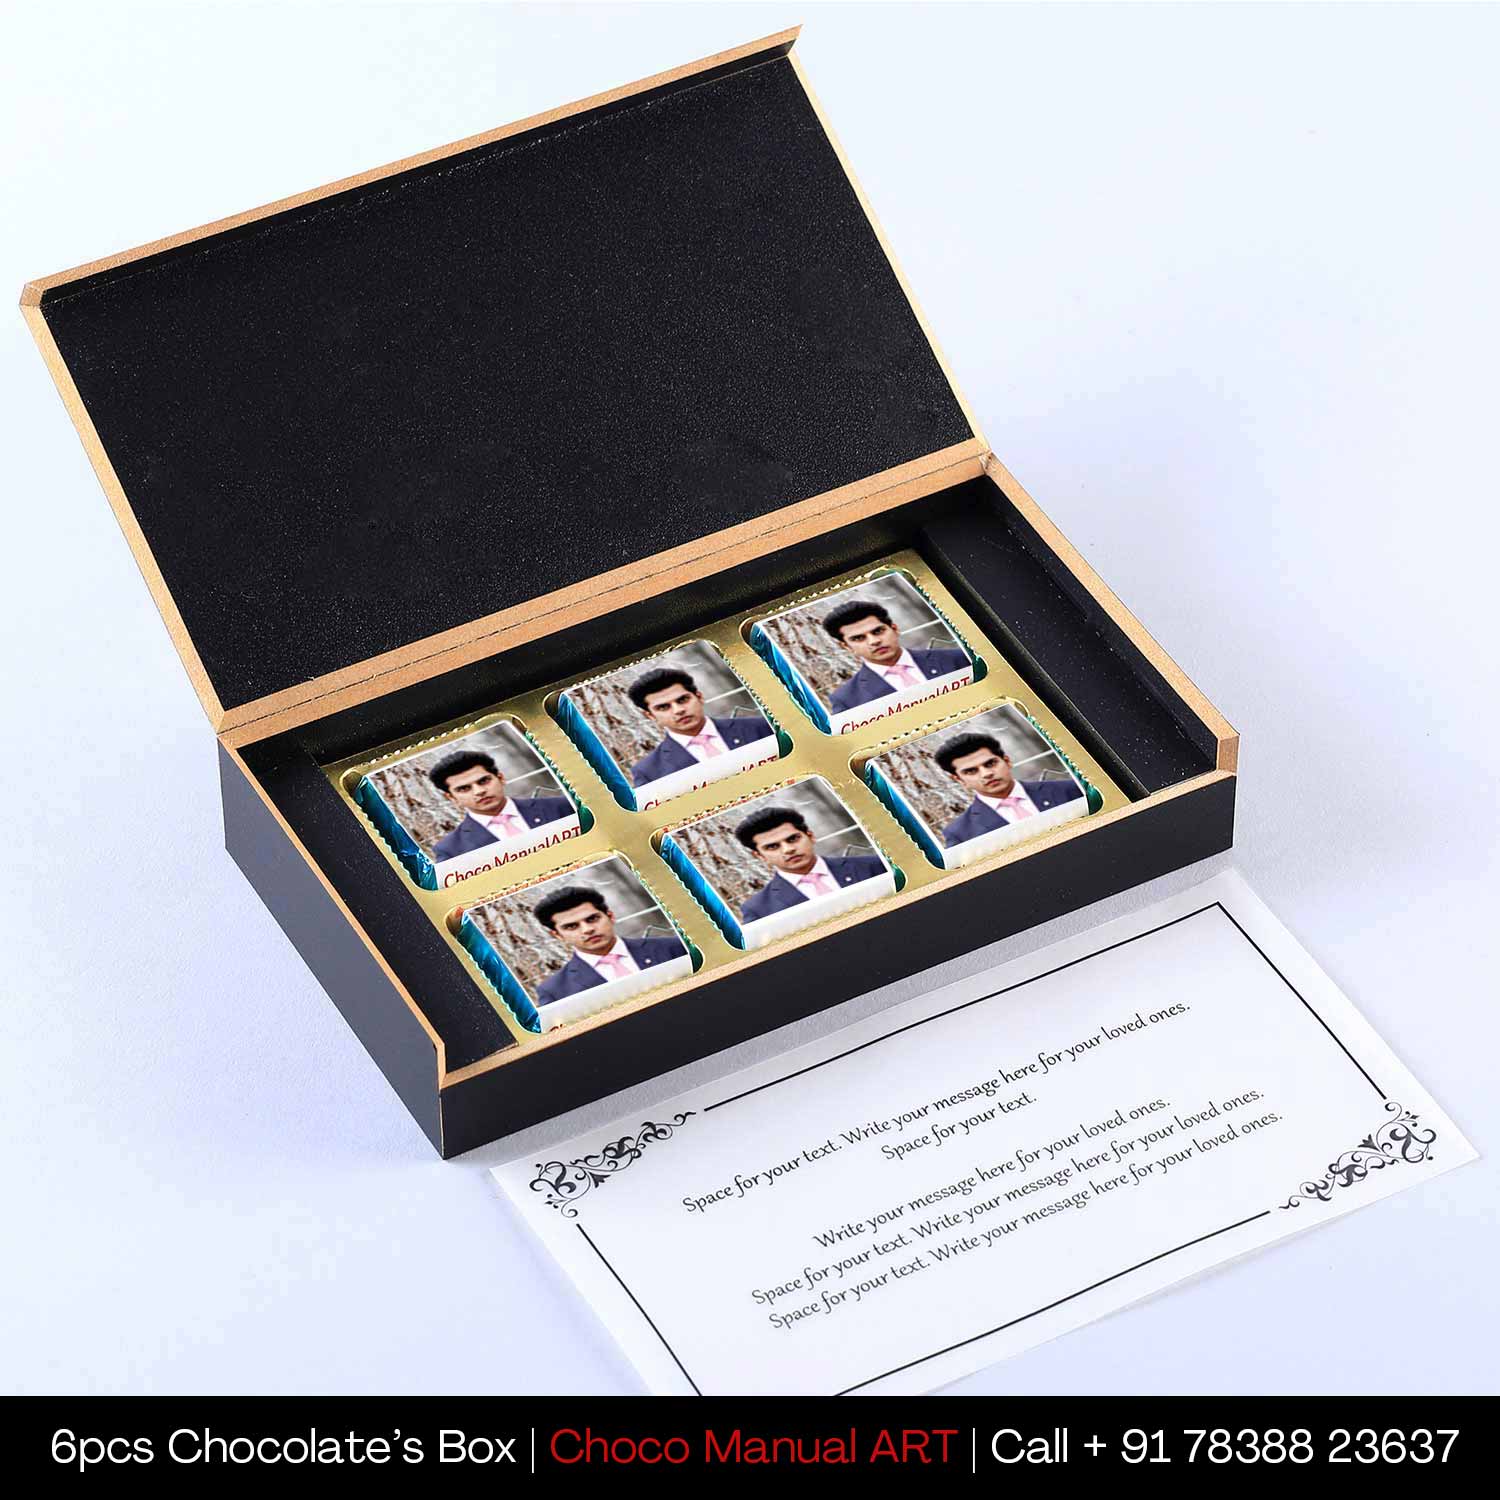 Thank you gift for best friend I  Pic/Name printed chocolate box I  Delicious chocolates I  Free shipping across India I  Elegant wooden packaging